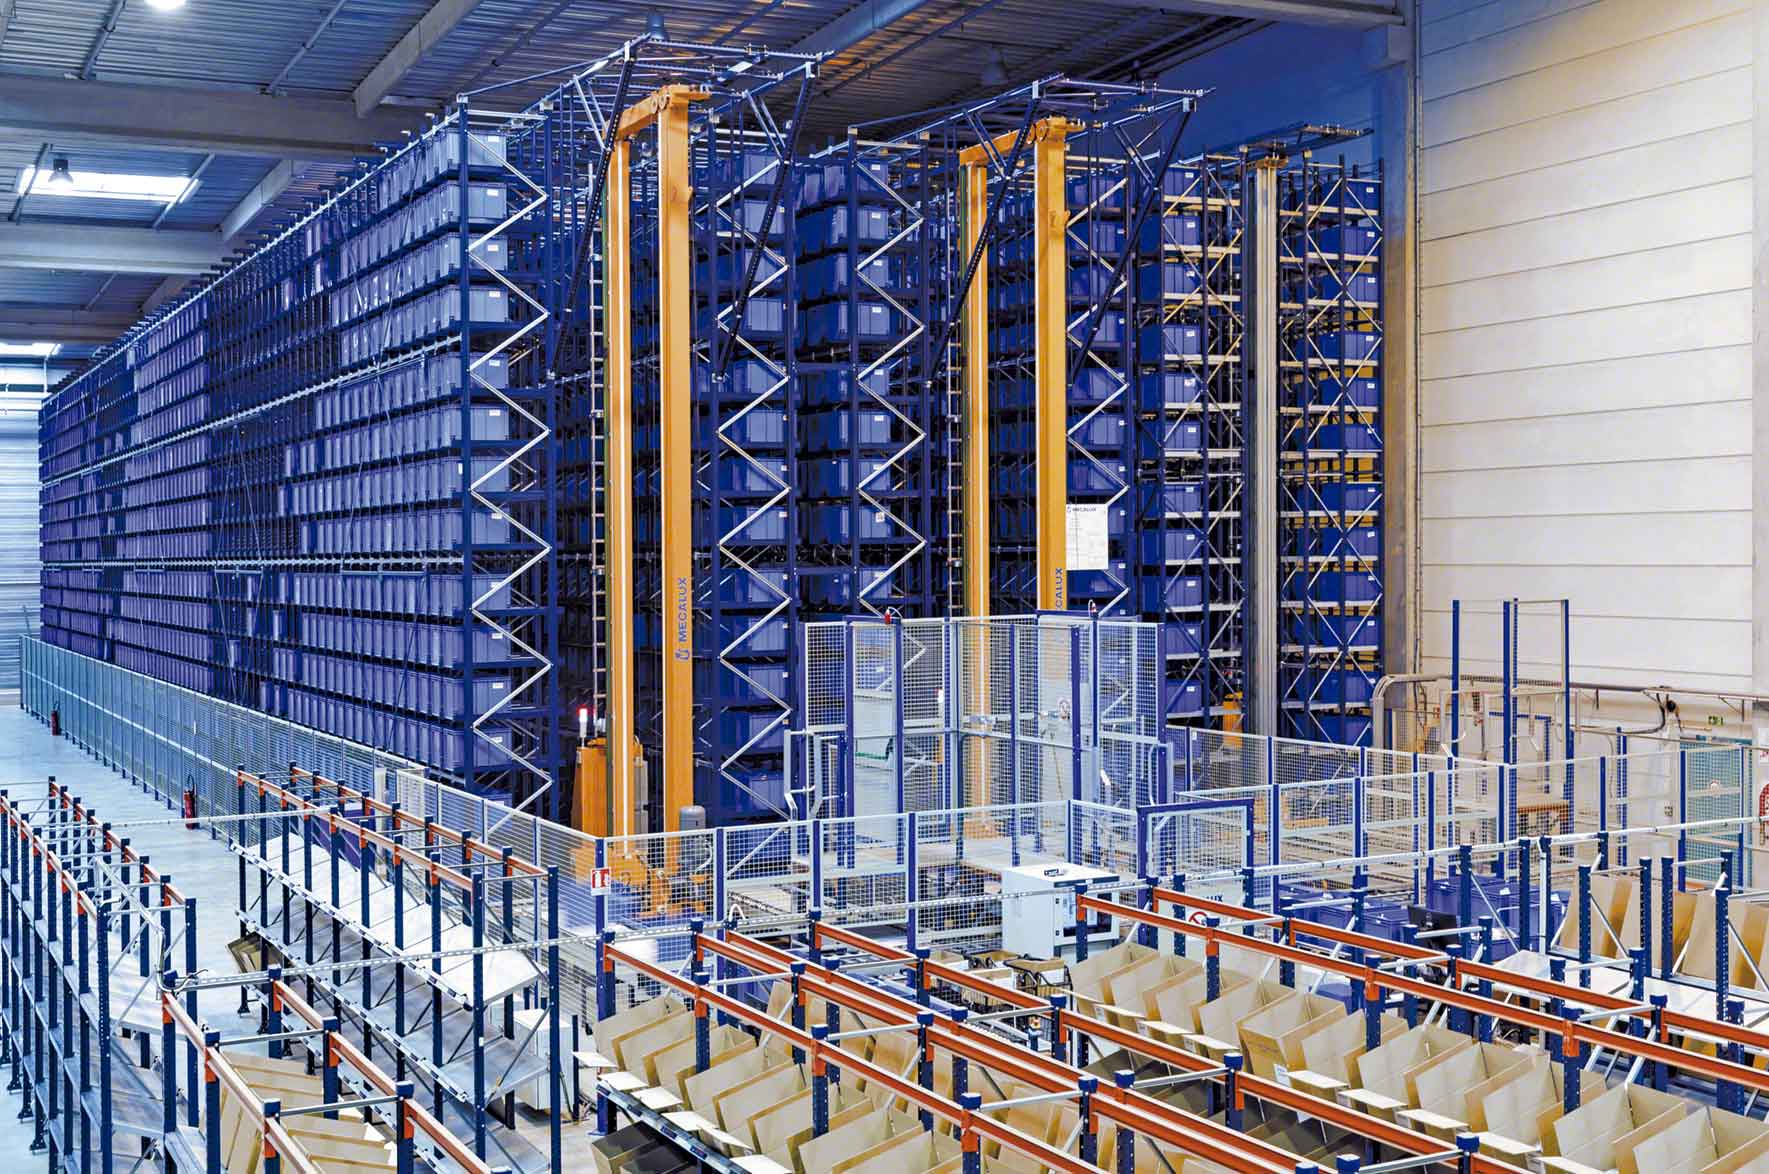 Types of automated storage and retrieval systems: characteristics and advantages